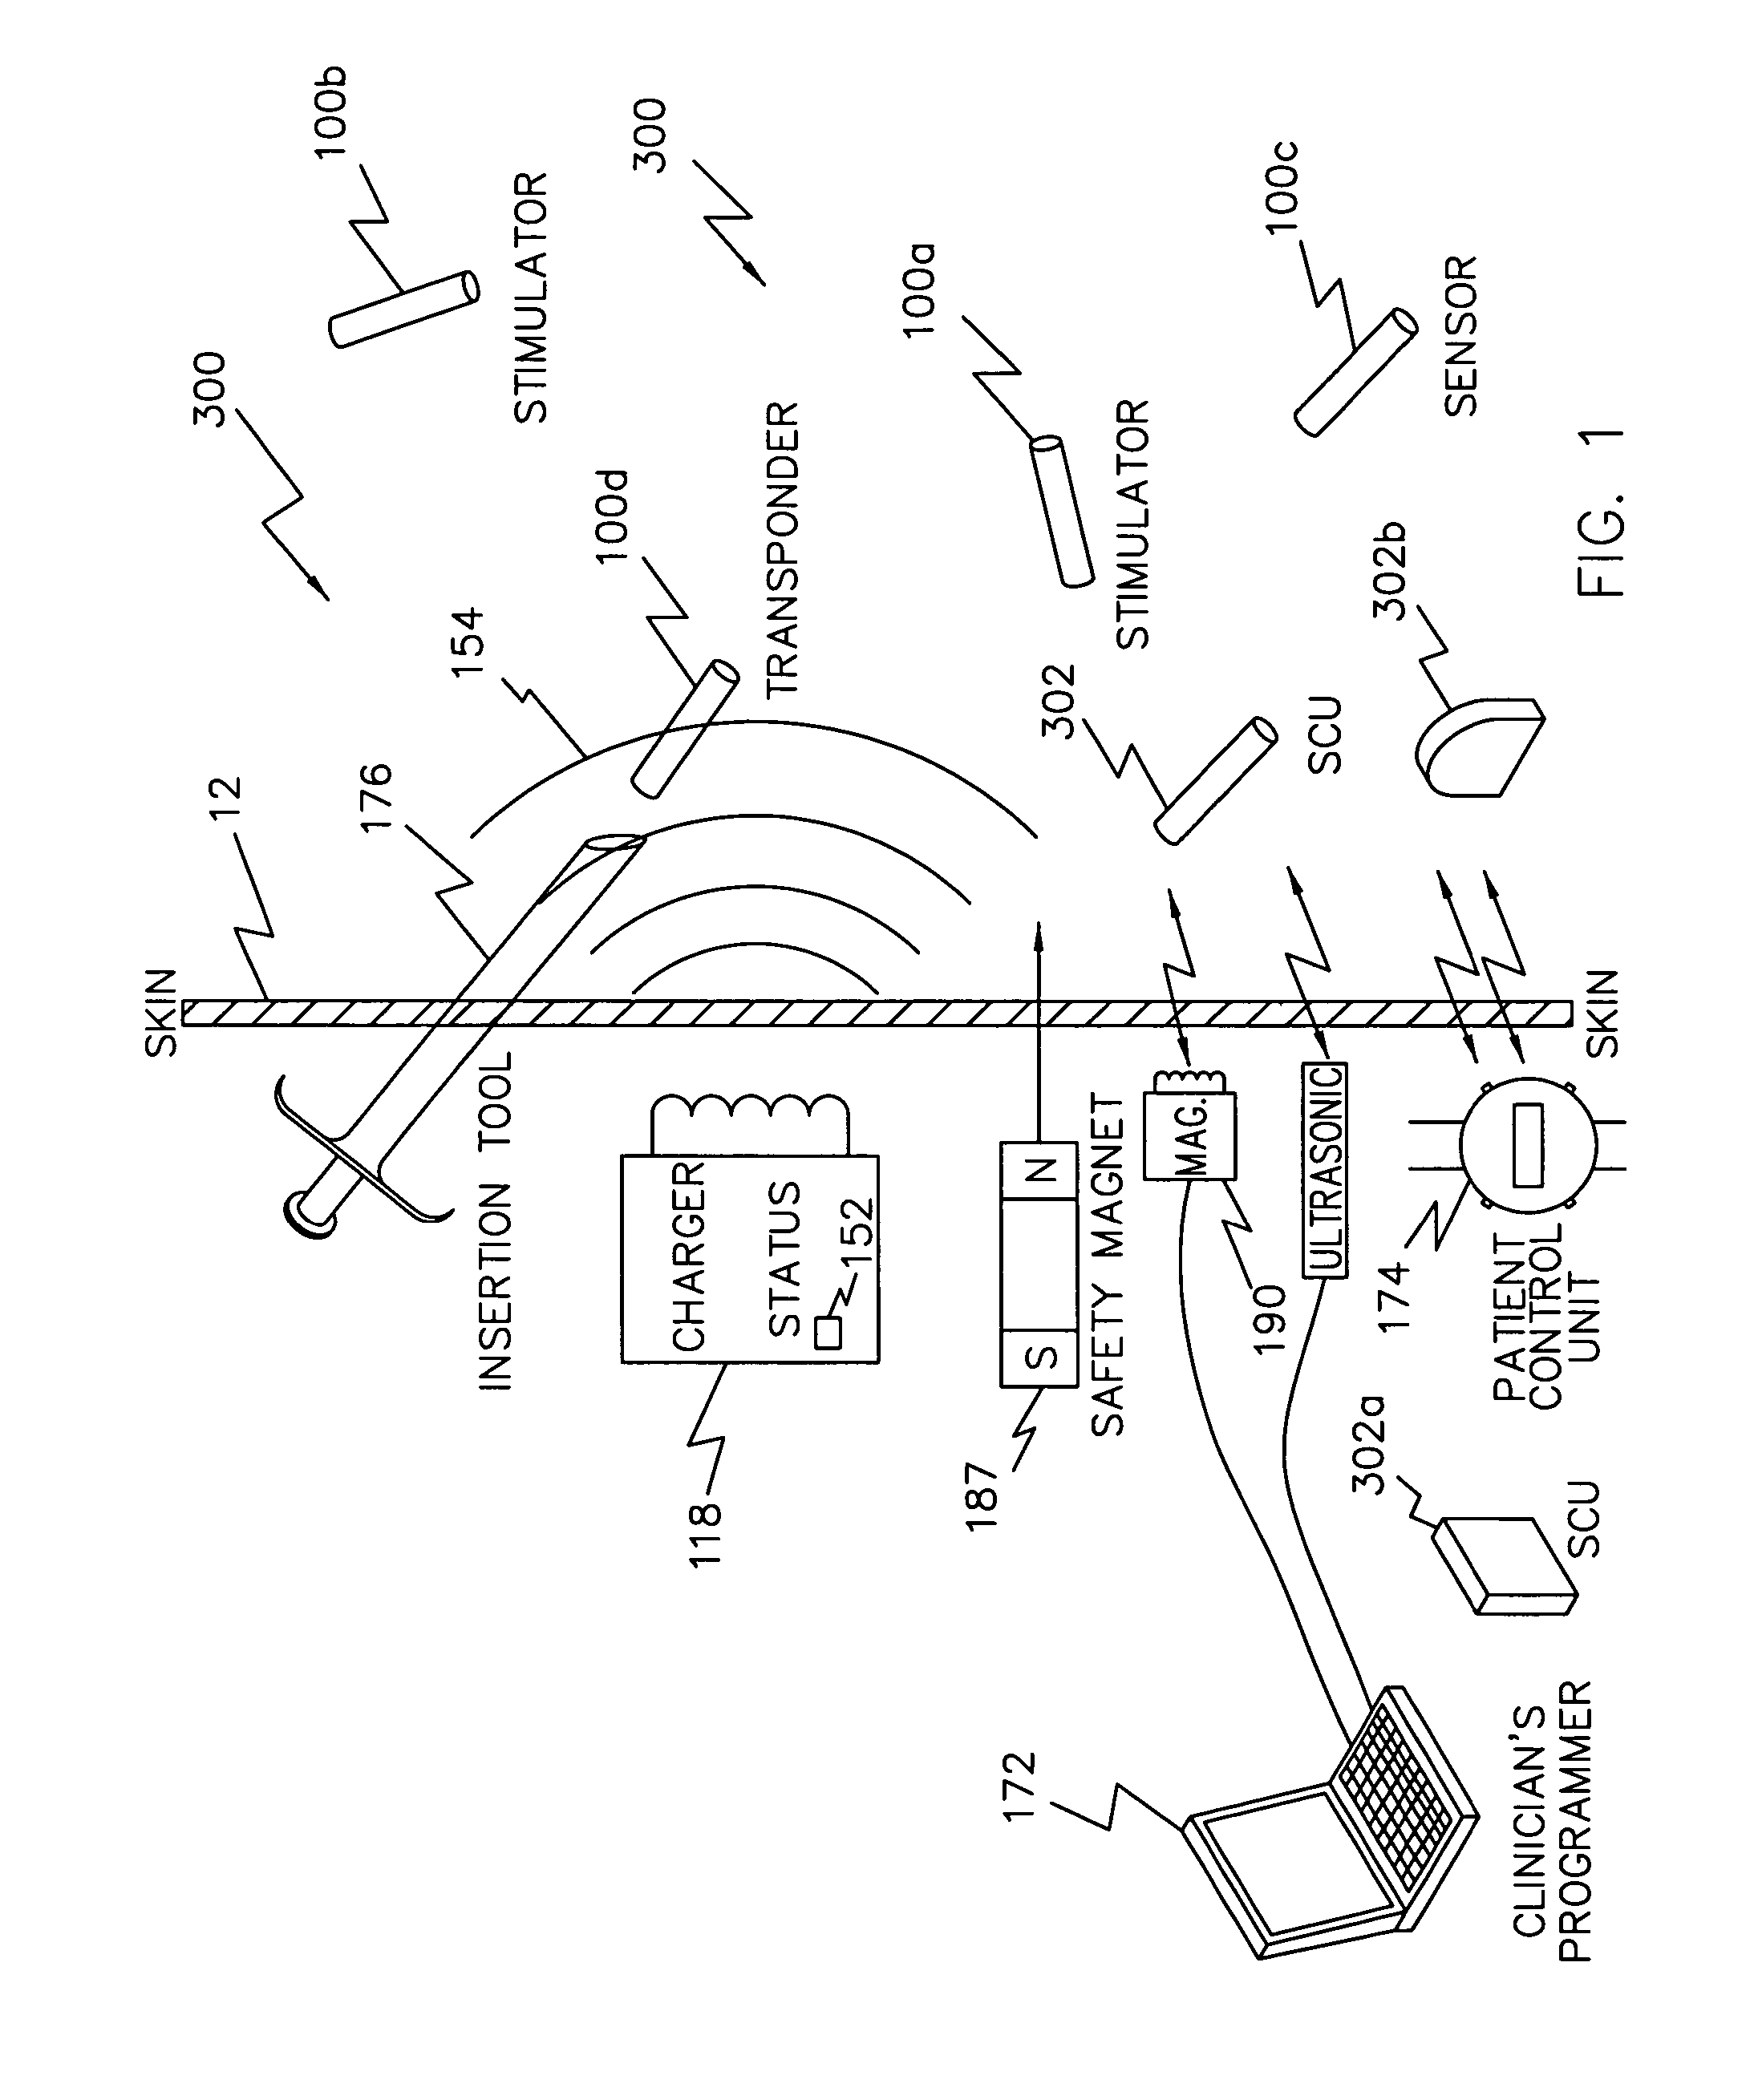 System of implantable ultrasonic emitters for preventing restenosis following a stent procedure